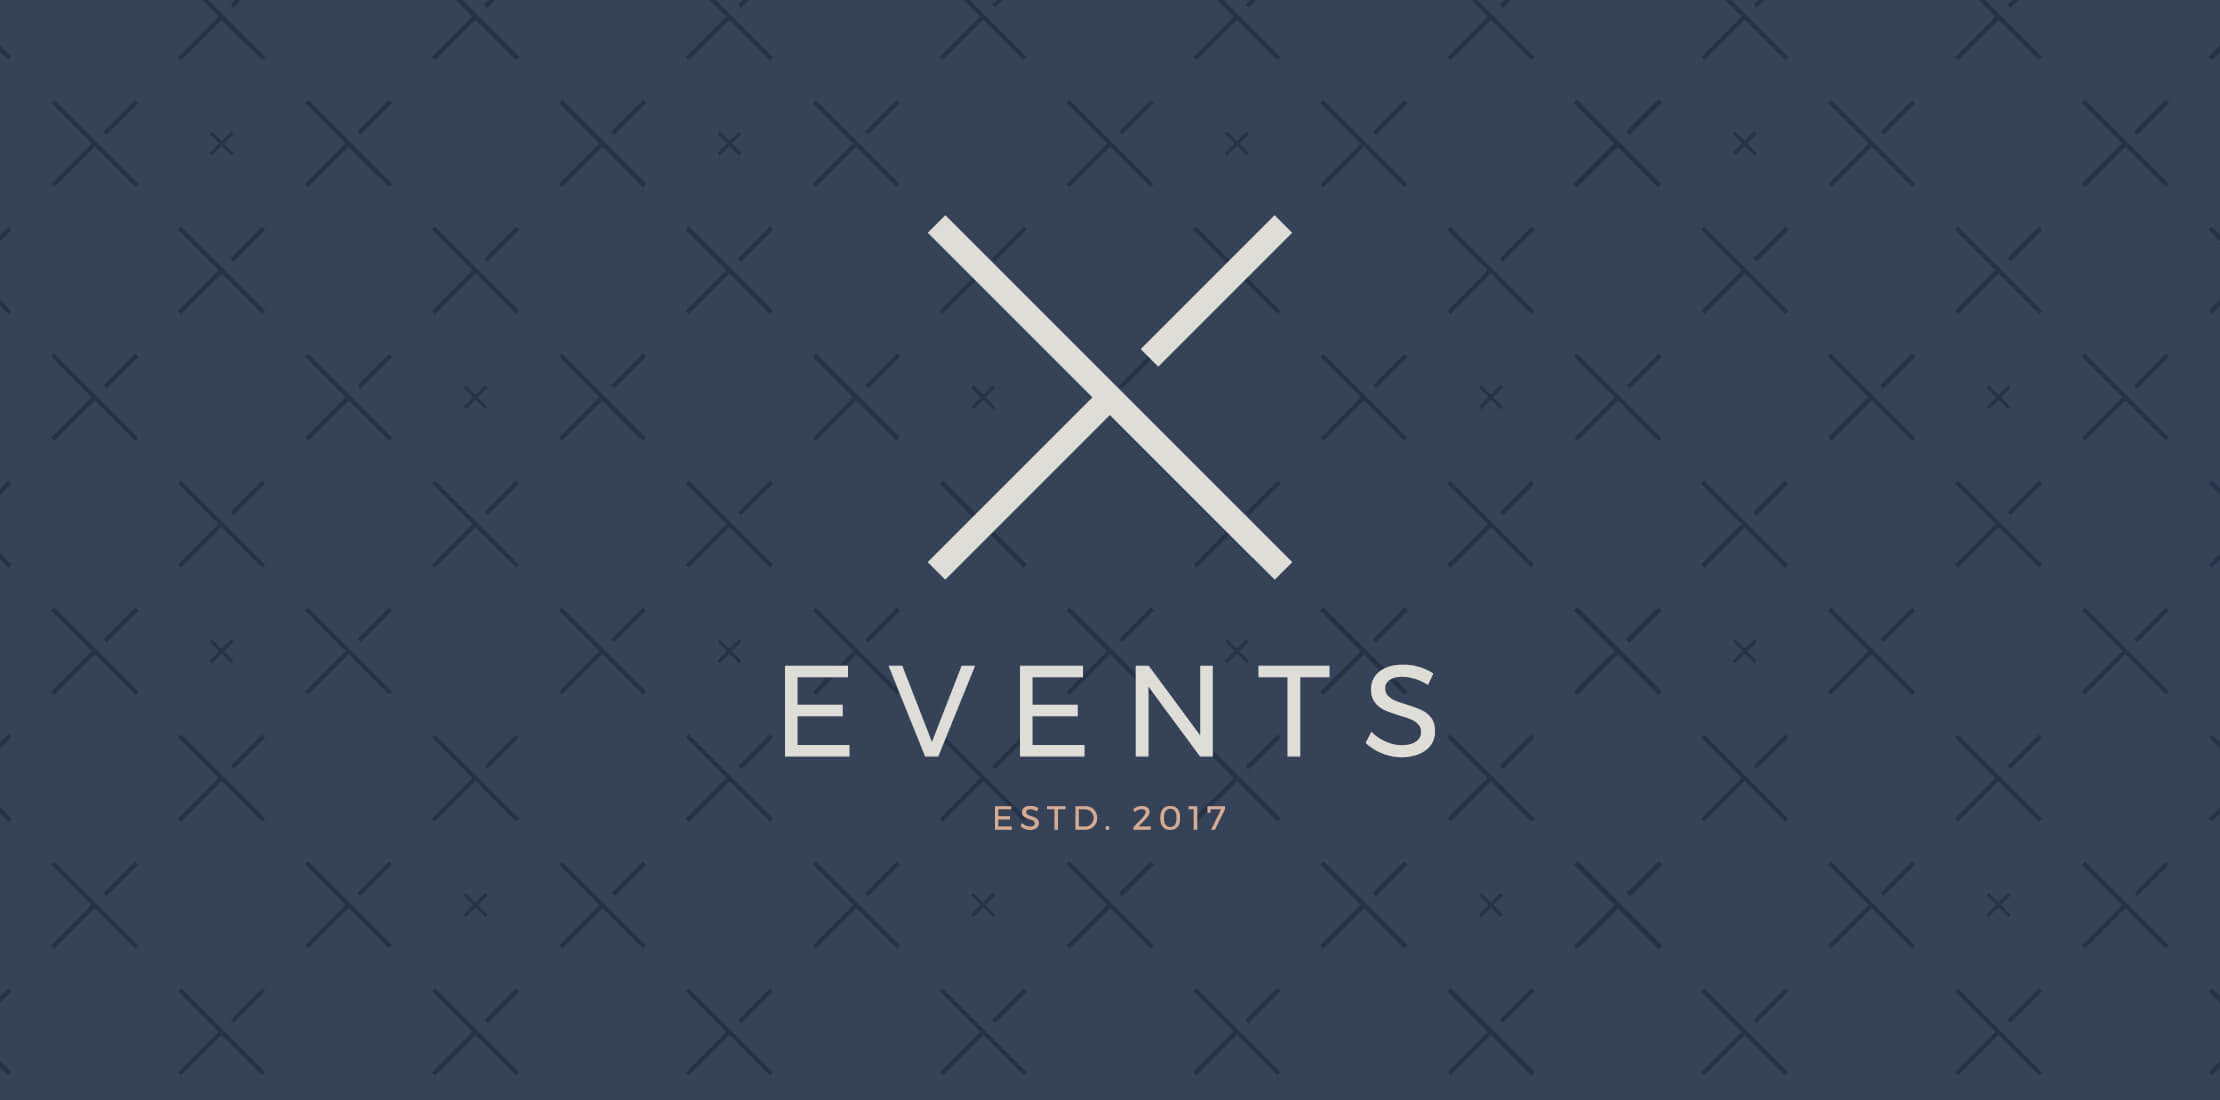 X Events primary logo, in grey and pink, on a dark blue pattern background